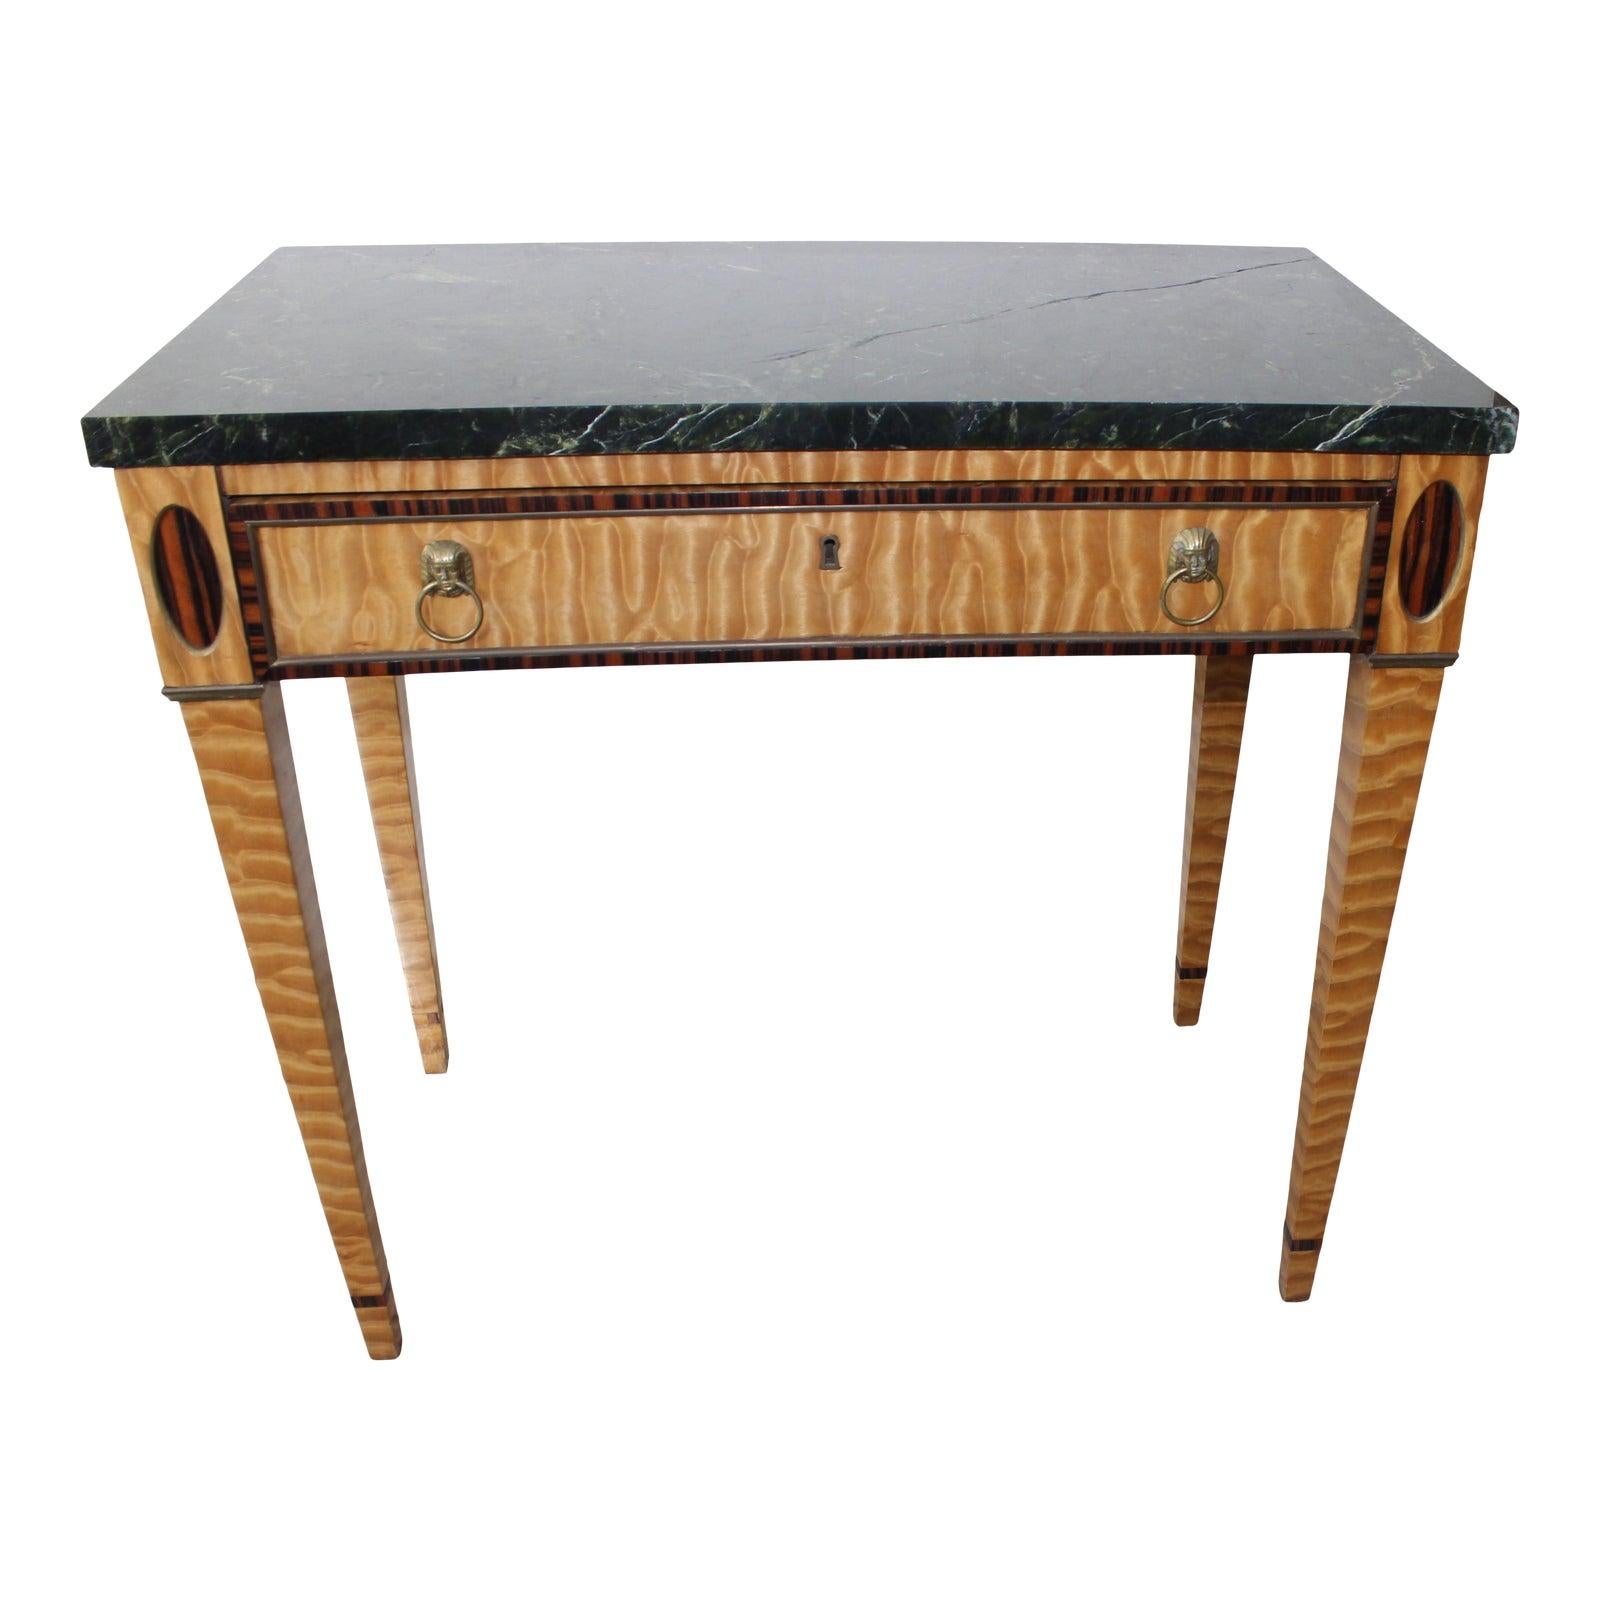 Mid-19 Century American Side Table in Ribbon Satinwood and Marble